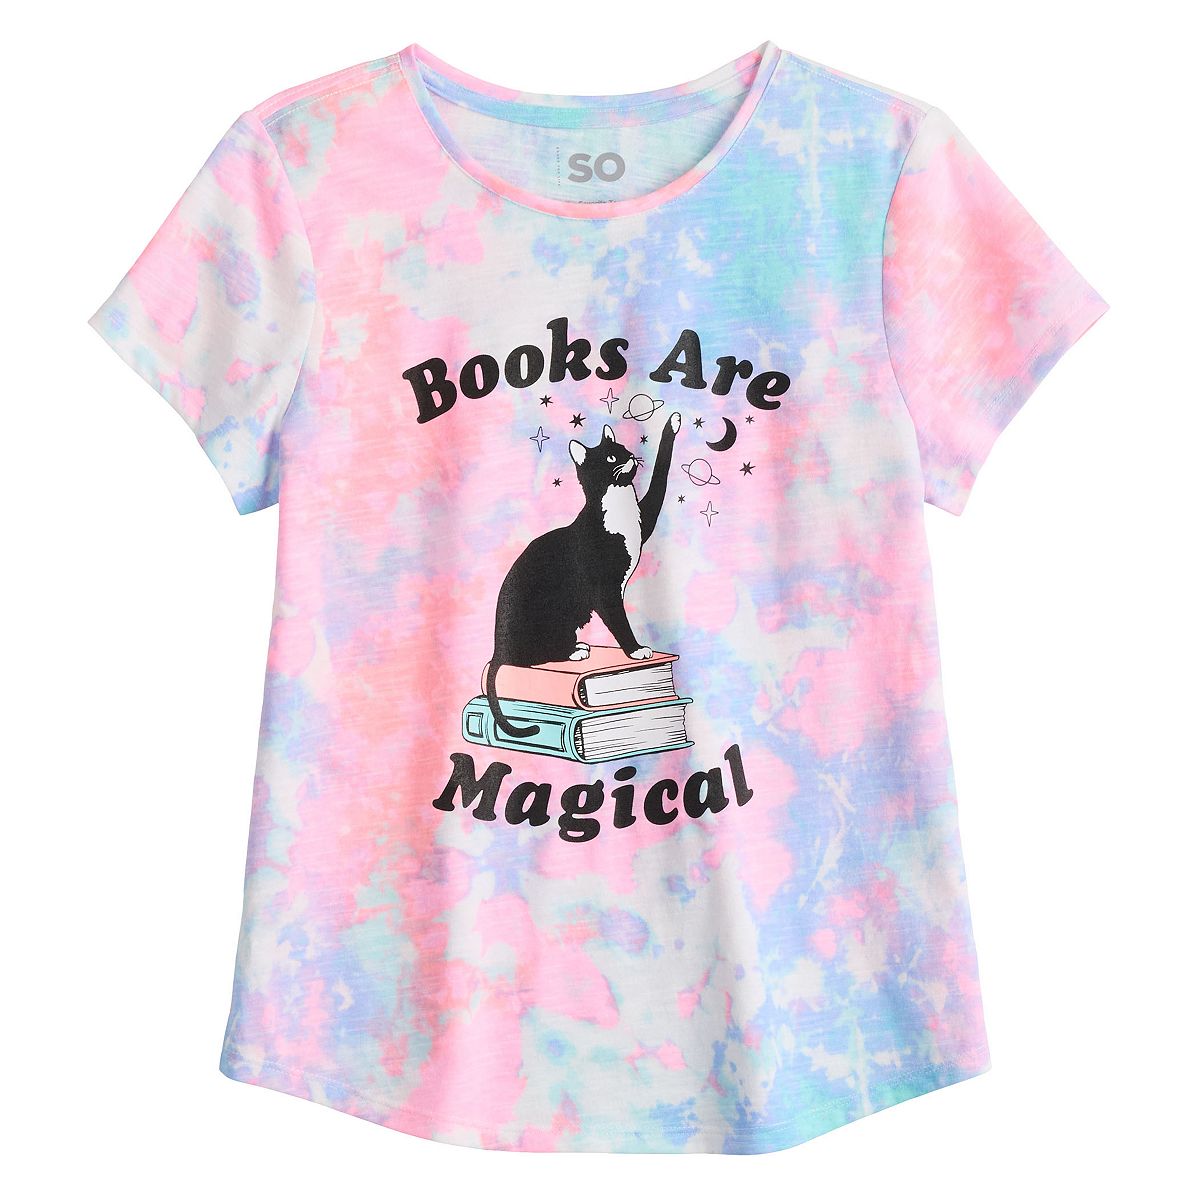 Books are magical tie dye shirt.